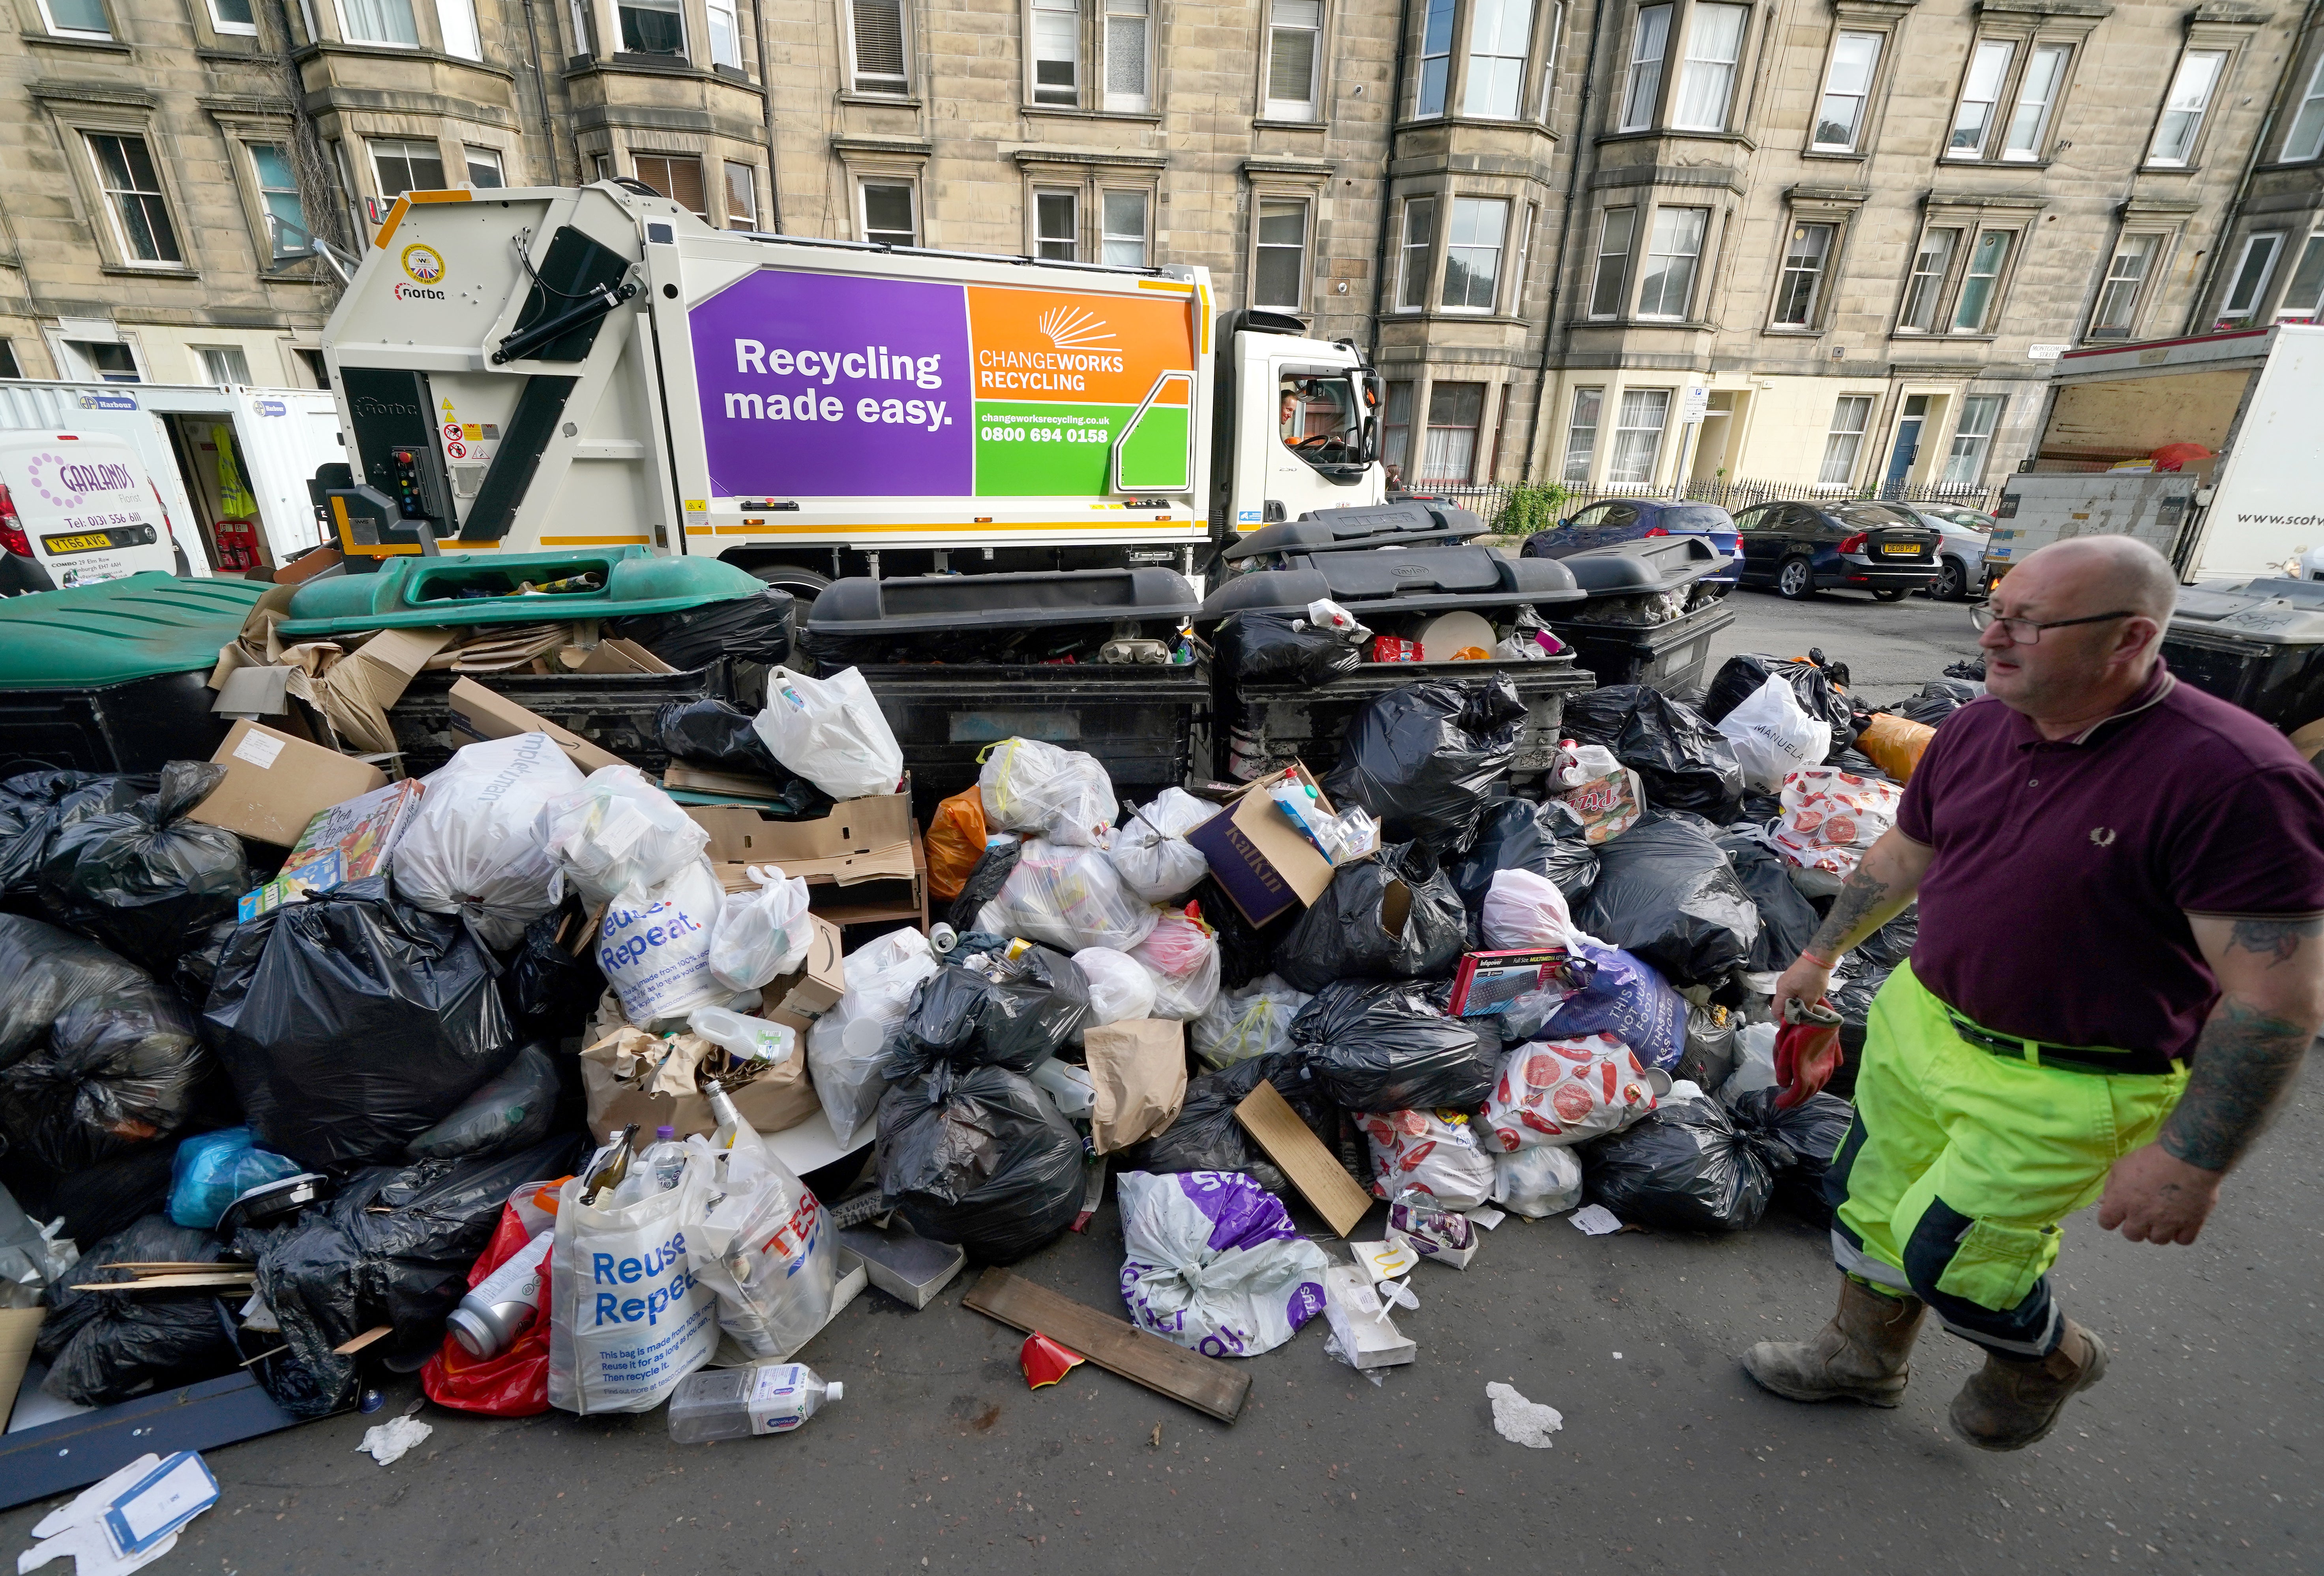 Bins in Edinburgh have been overflowing as a result of recent action (Andrew Milligan/PA)